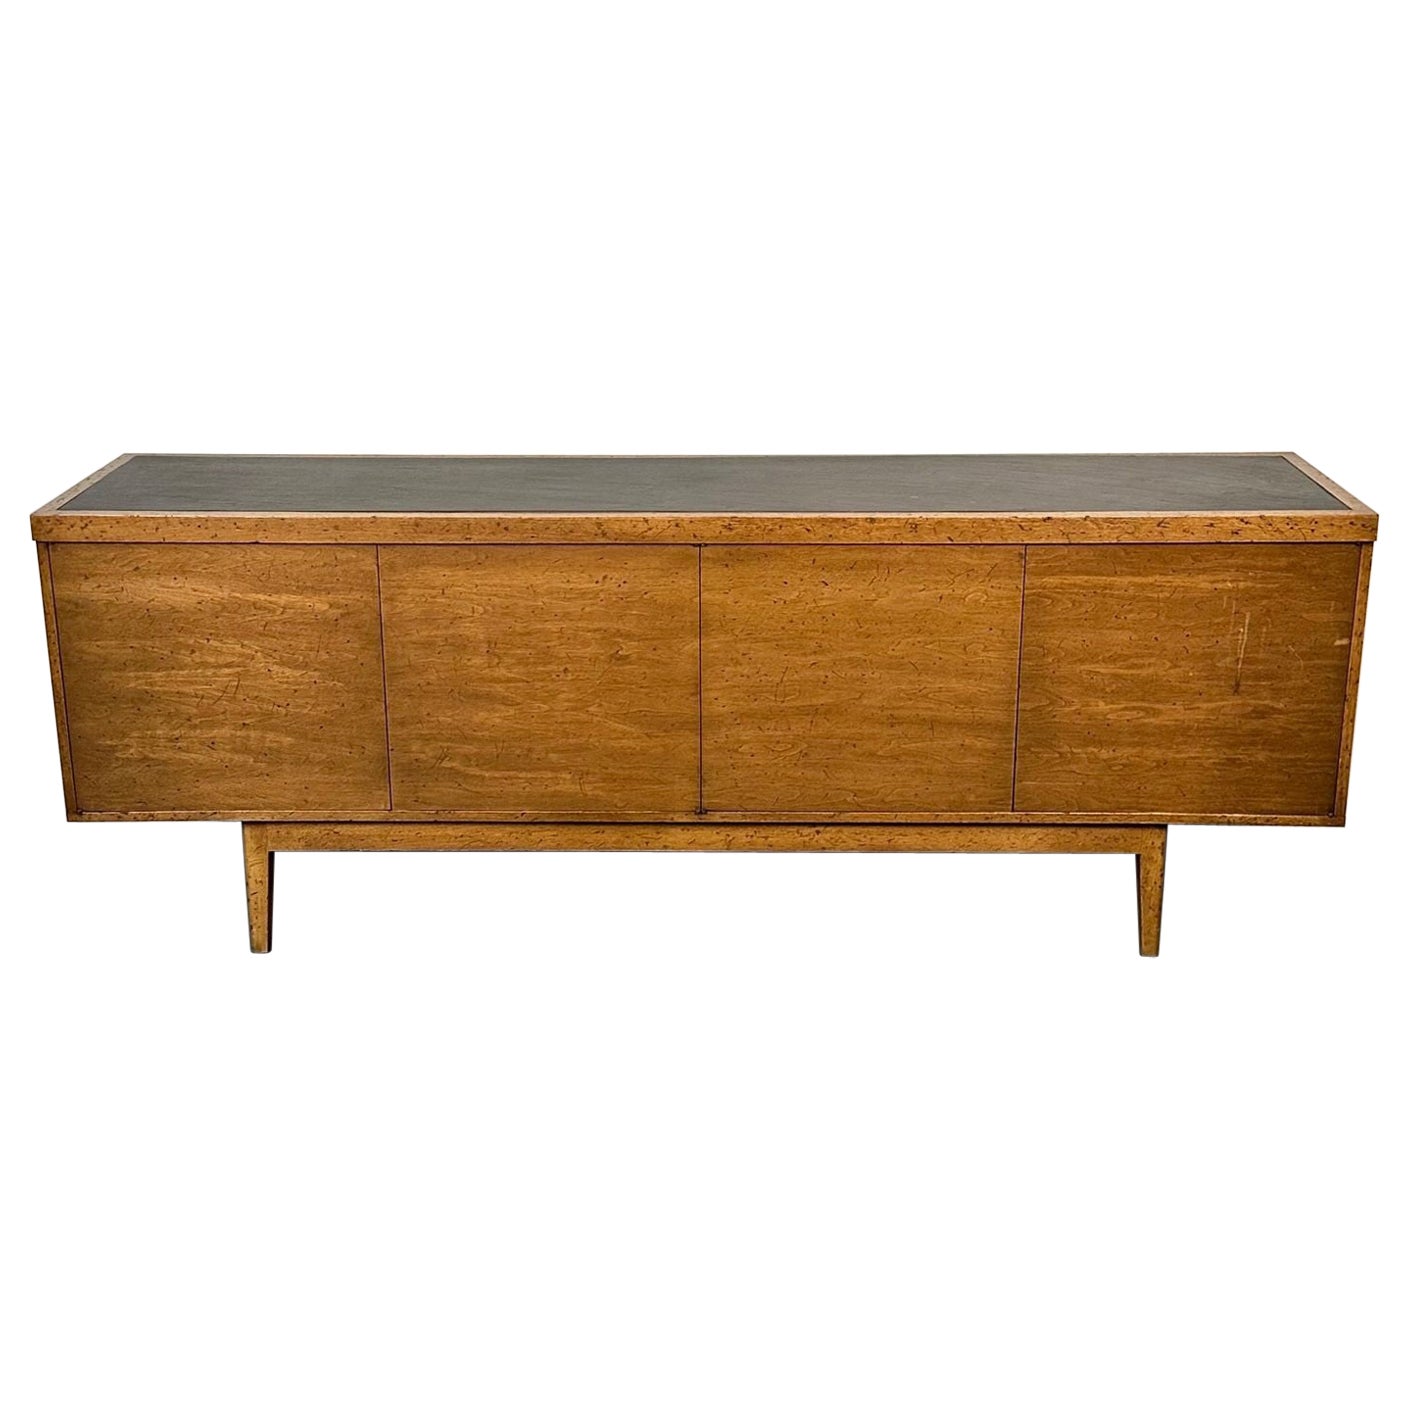 Mid-Century Modern Sideboard / Credenza, Rustic Provincial Cabinet, Slate Top For Sale